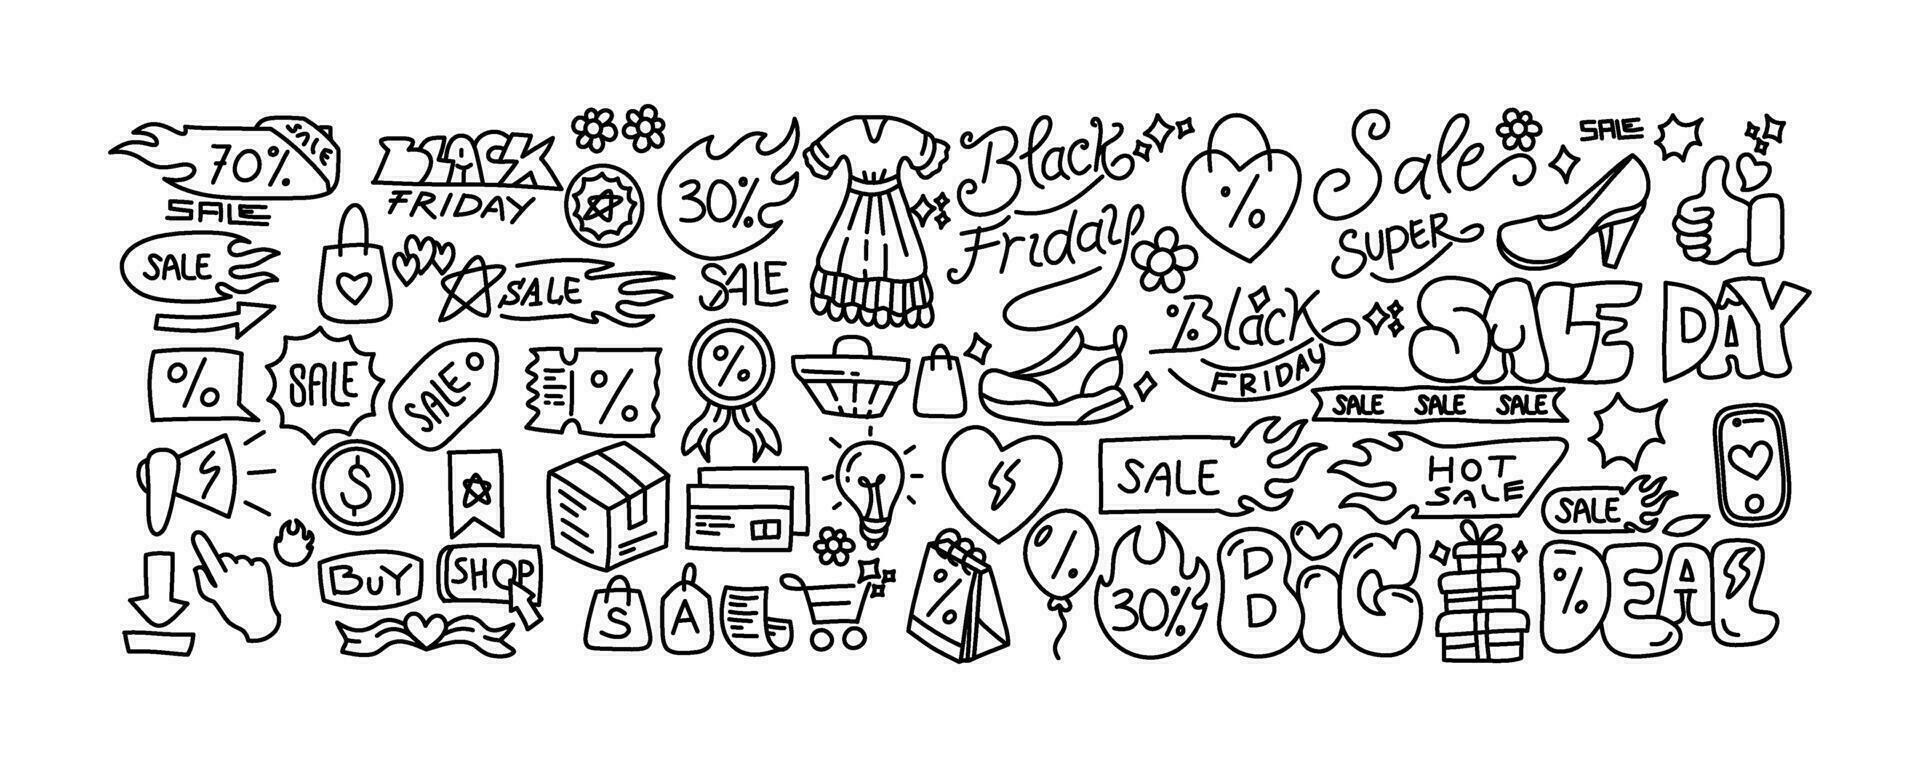 Set of Black Friday Doodle Icon Vector Art. Line art vector hand drawn set of Shopping cartoon doodle objects, symbols and items.